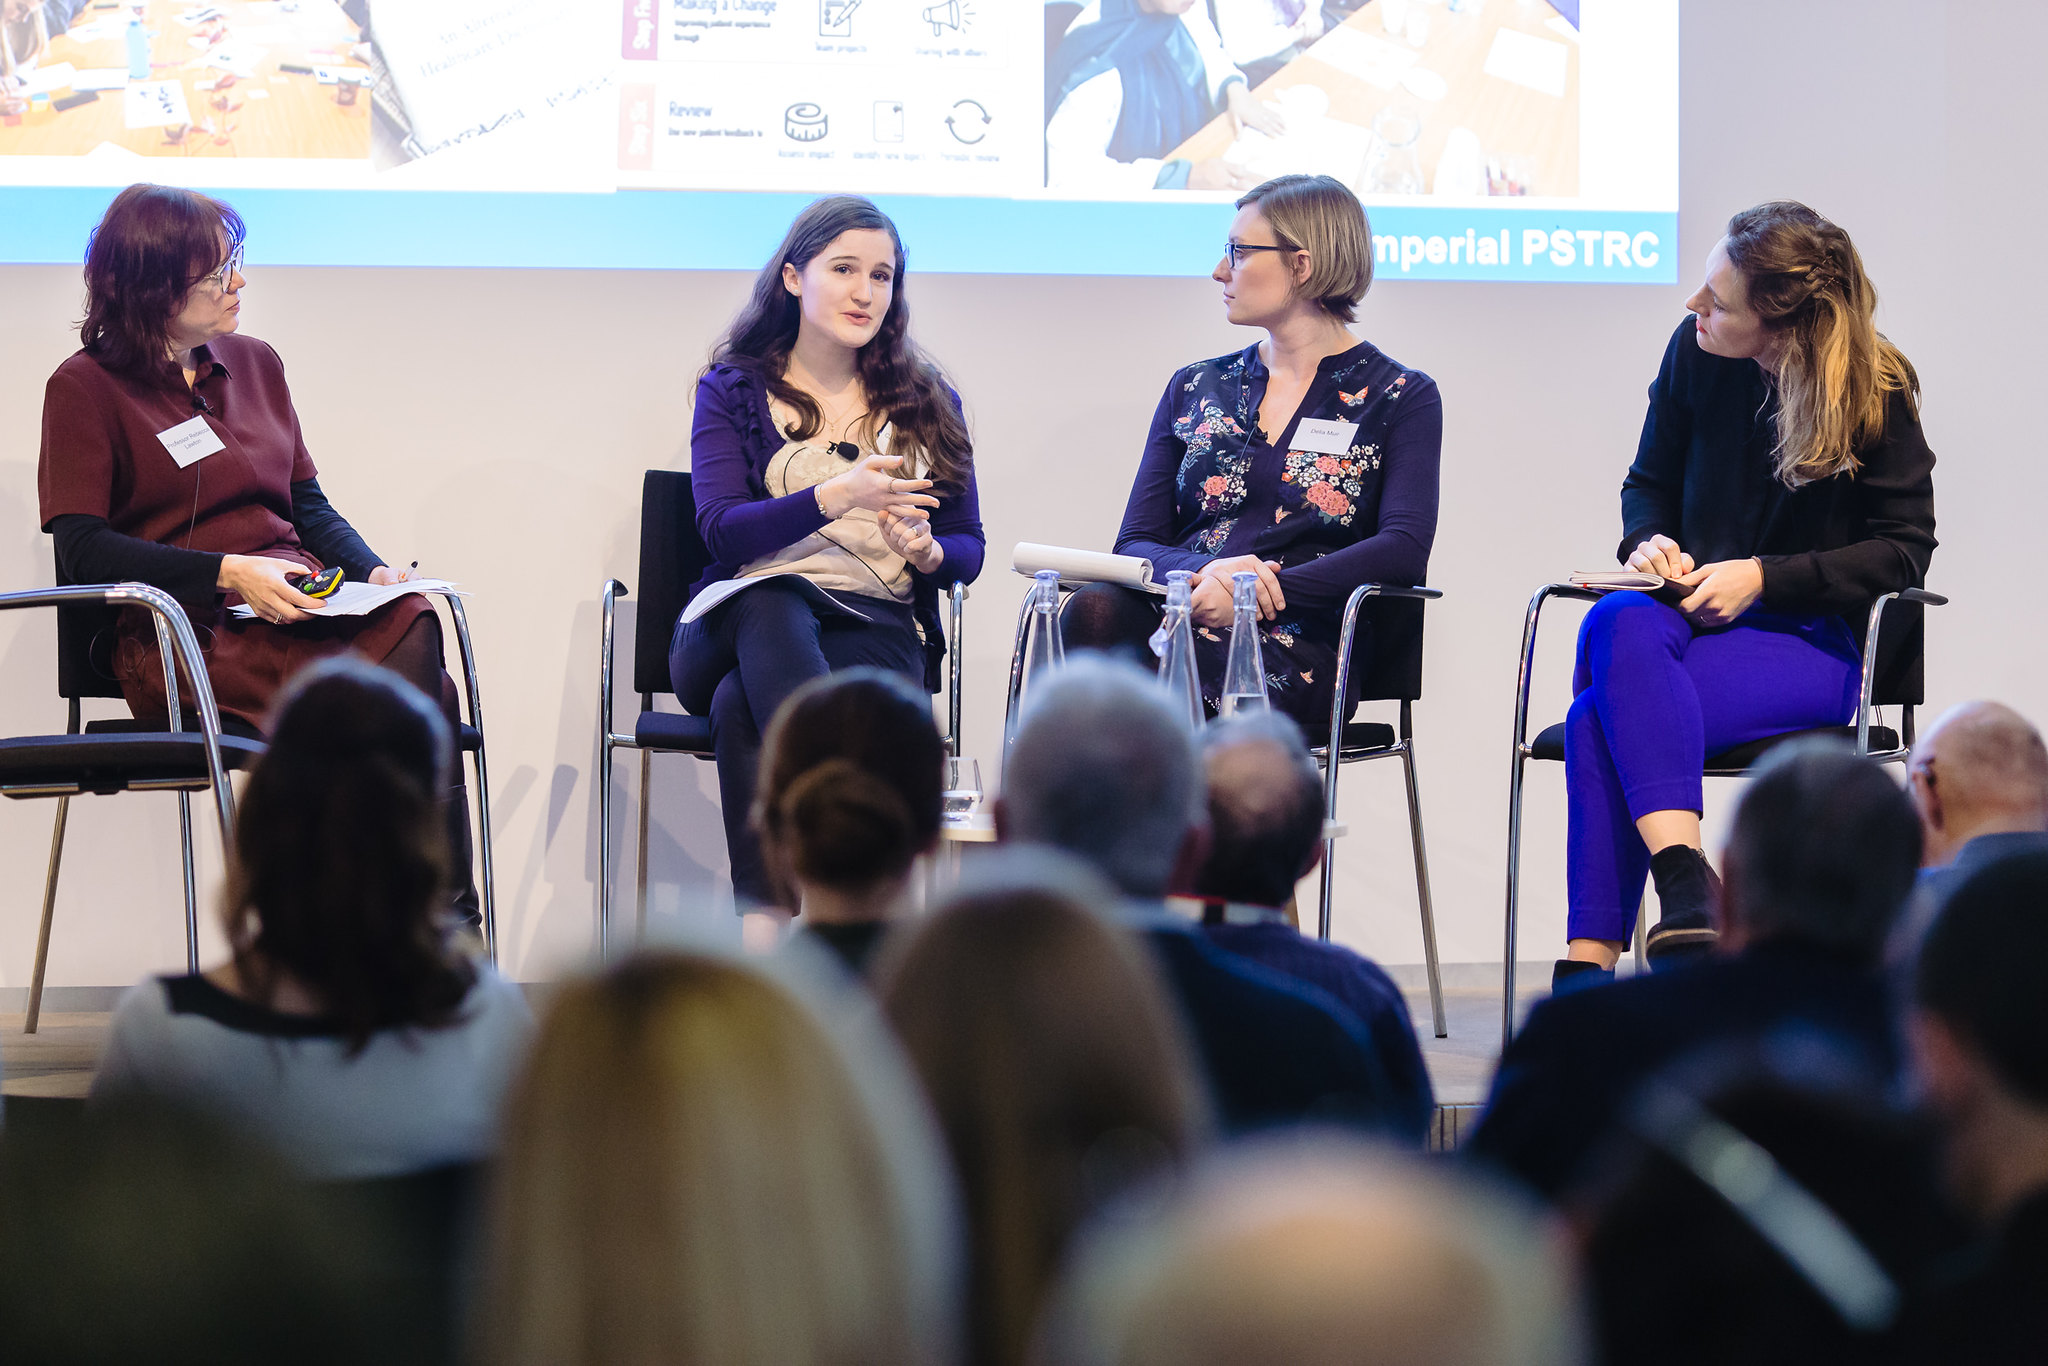 A photograph of an all-female panel discussing research involvement at a conference